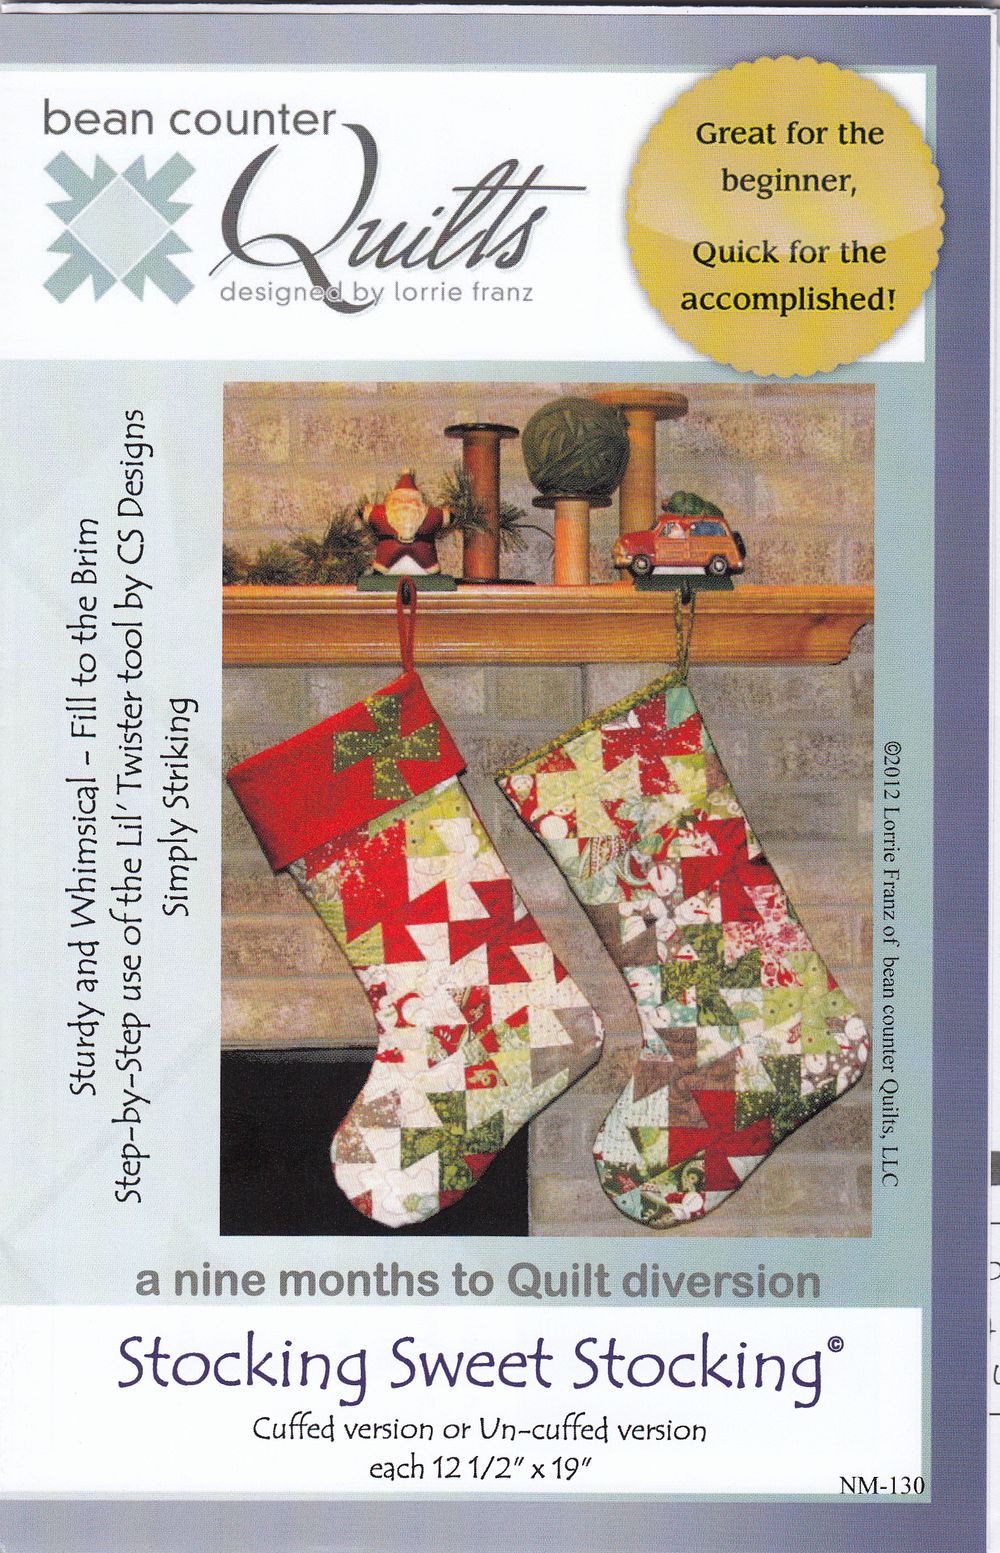 Stocking Sweet Stocking Quilt Pattern by Lorrie Franz of Bean Counter Quilts